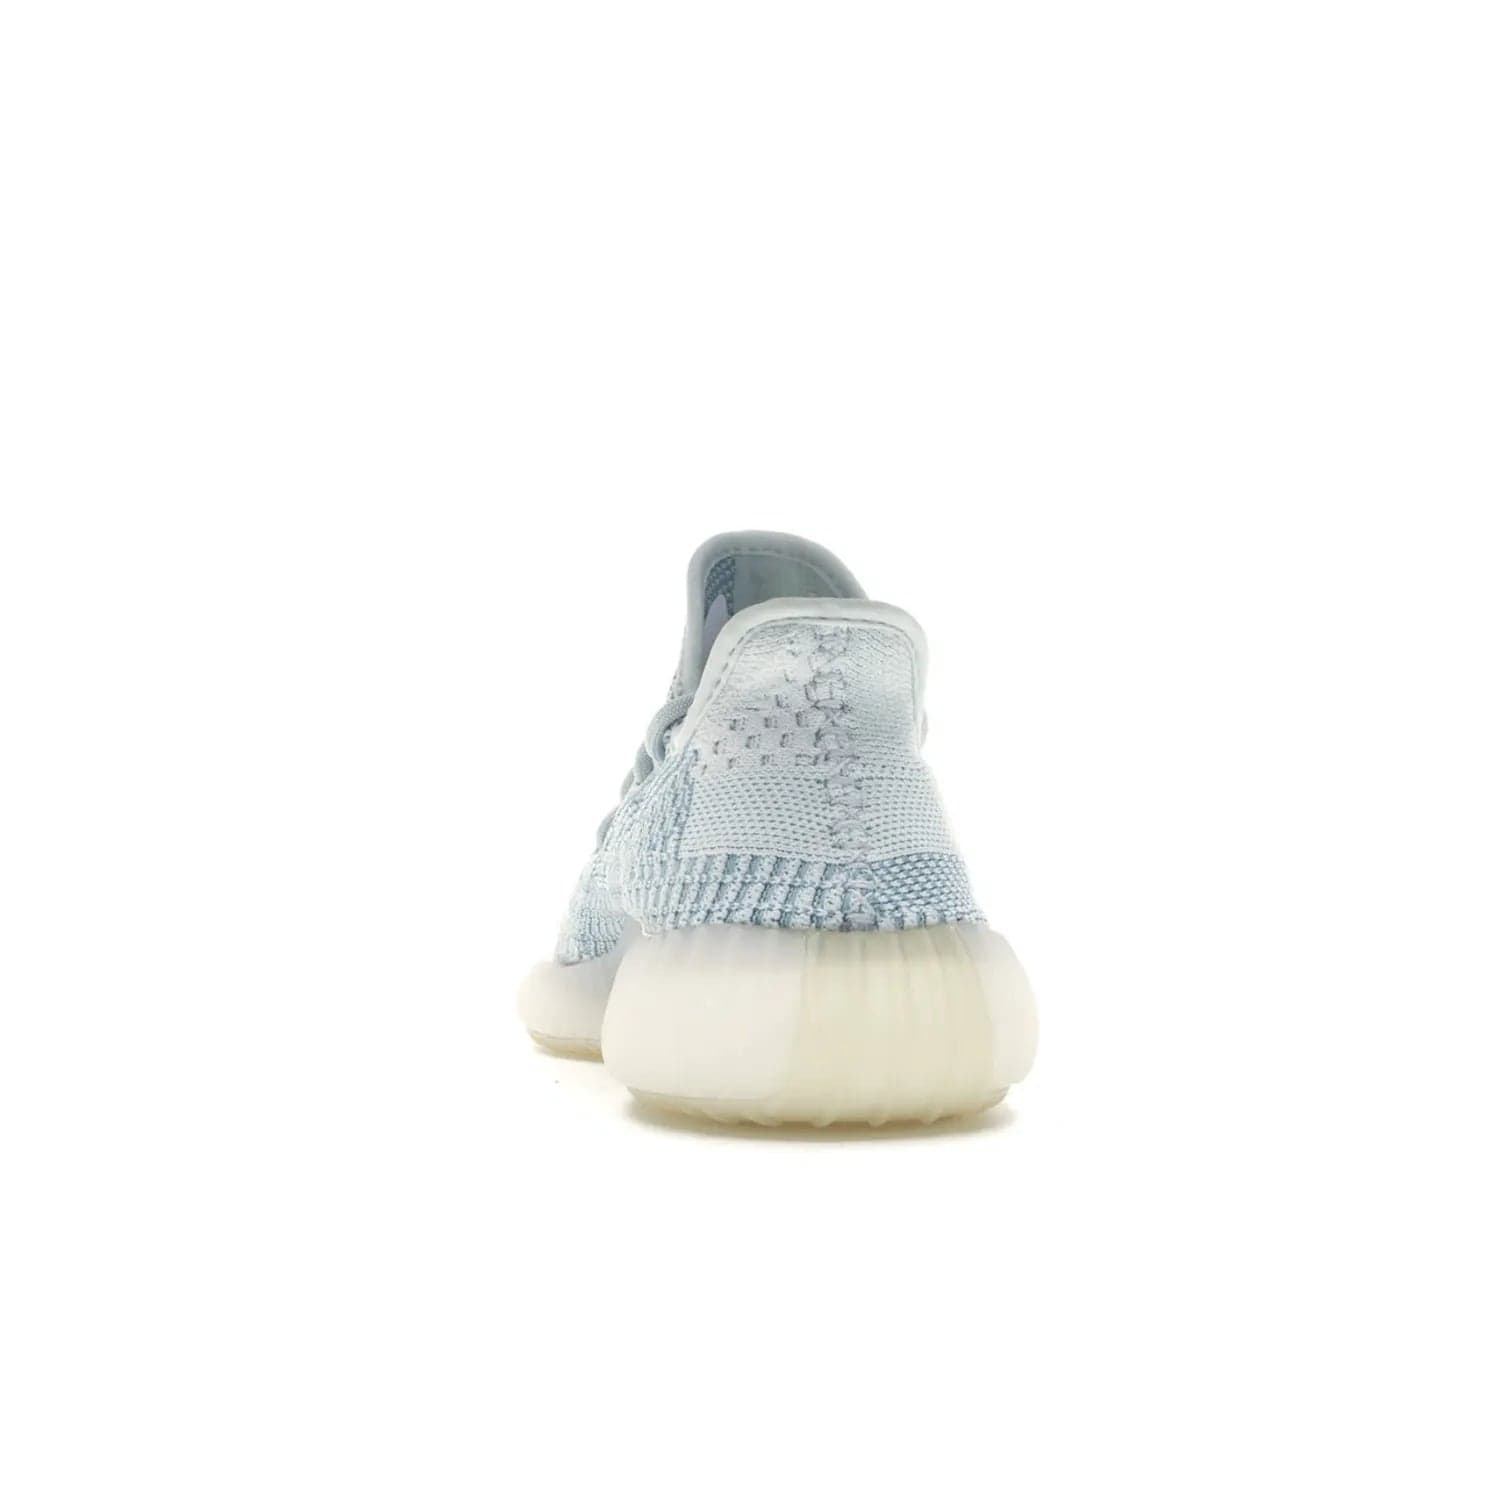 adidas Yeezy Boost 350 V2 Cloud White (Non-Reflective) - Image 27 - Only at www.BallersClubKickz.com - Uniquely designed adidas Yeezy Boost 350 V2 Cloud White (Non-Reflective) with a Primeknit upper in shades of cream and blue with a contrasting hard sole. A fashion-forward sneaker with a transparent strip and blue-and-white patterns.